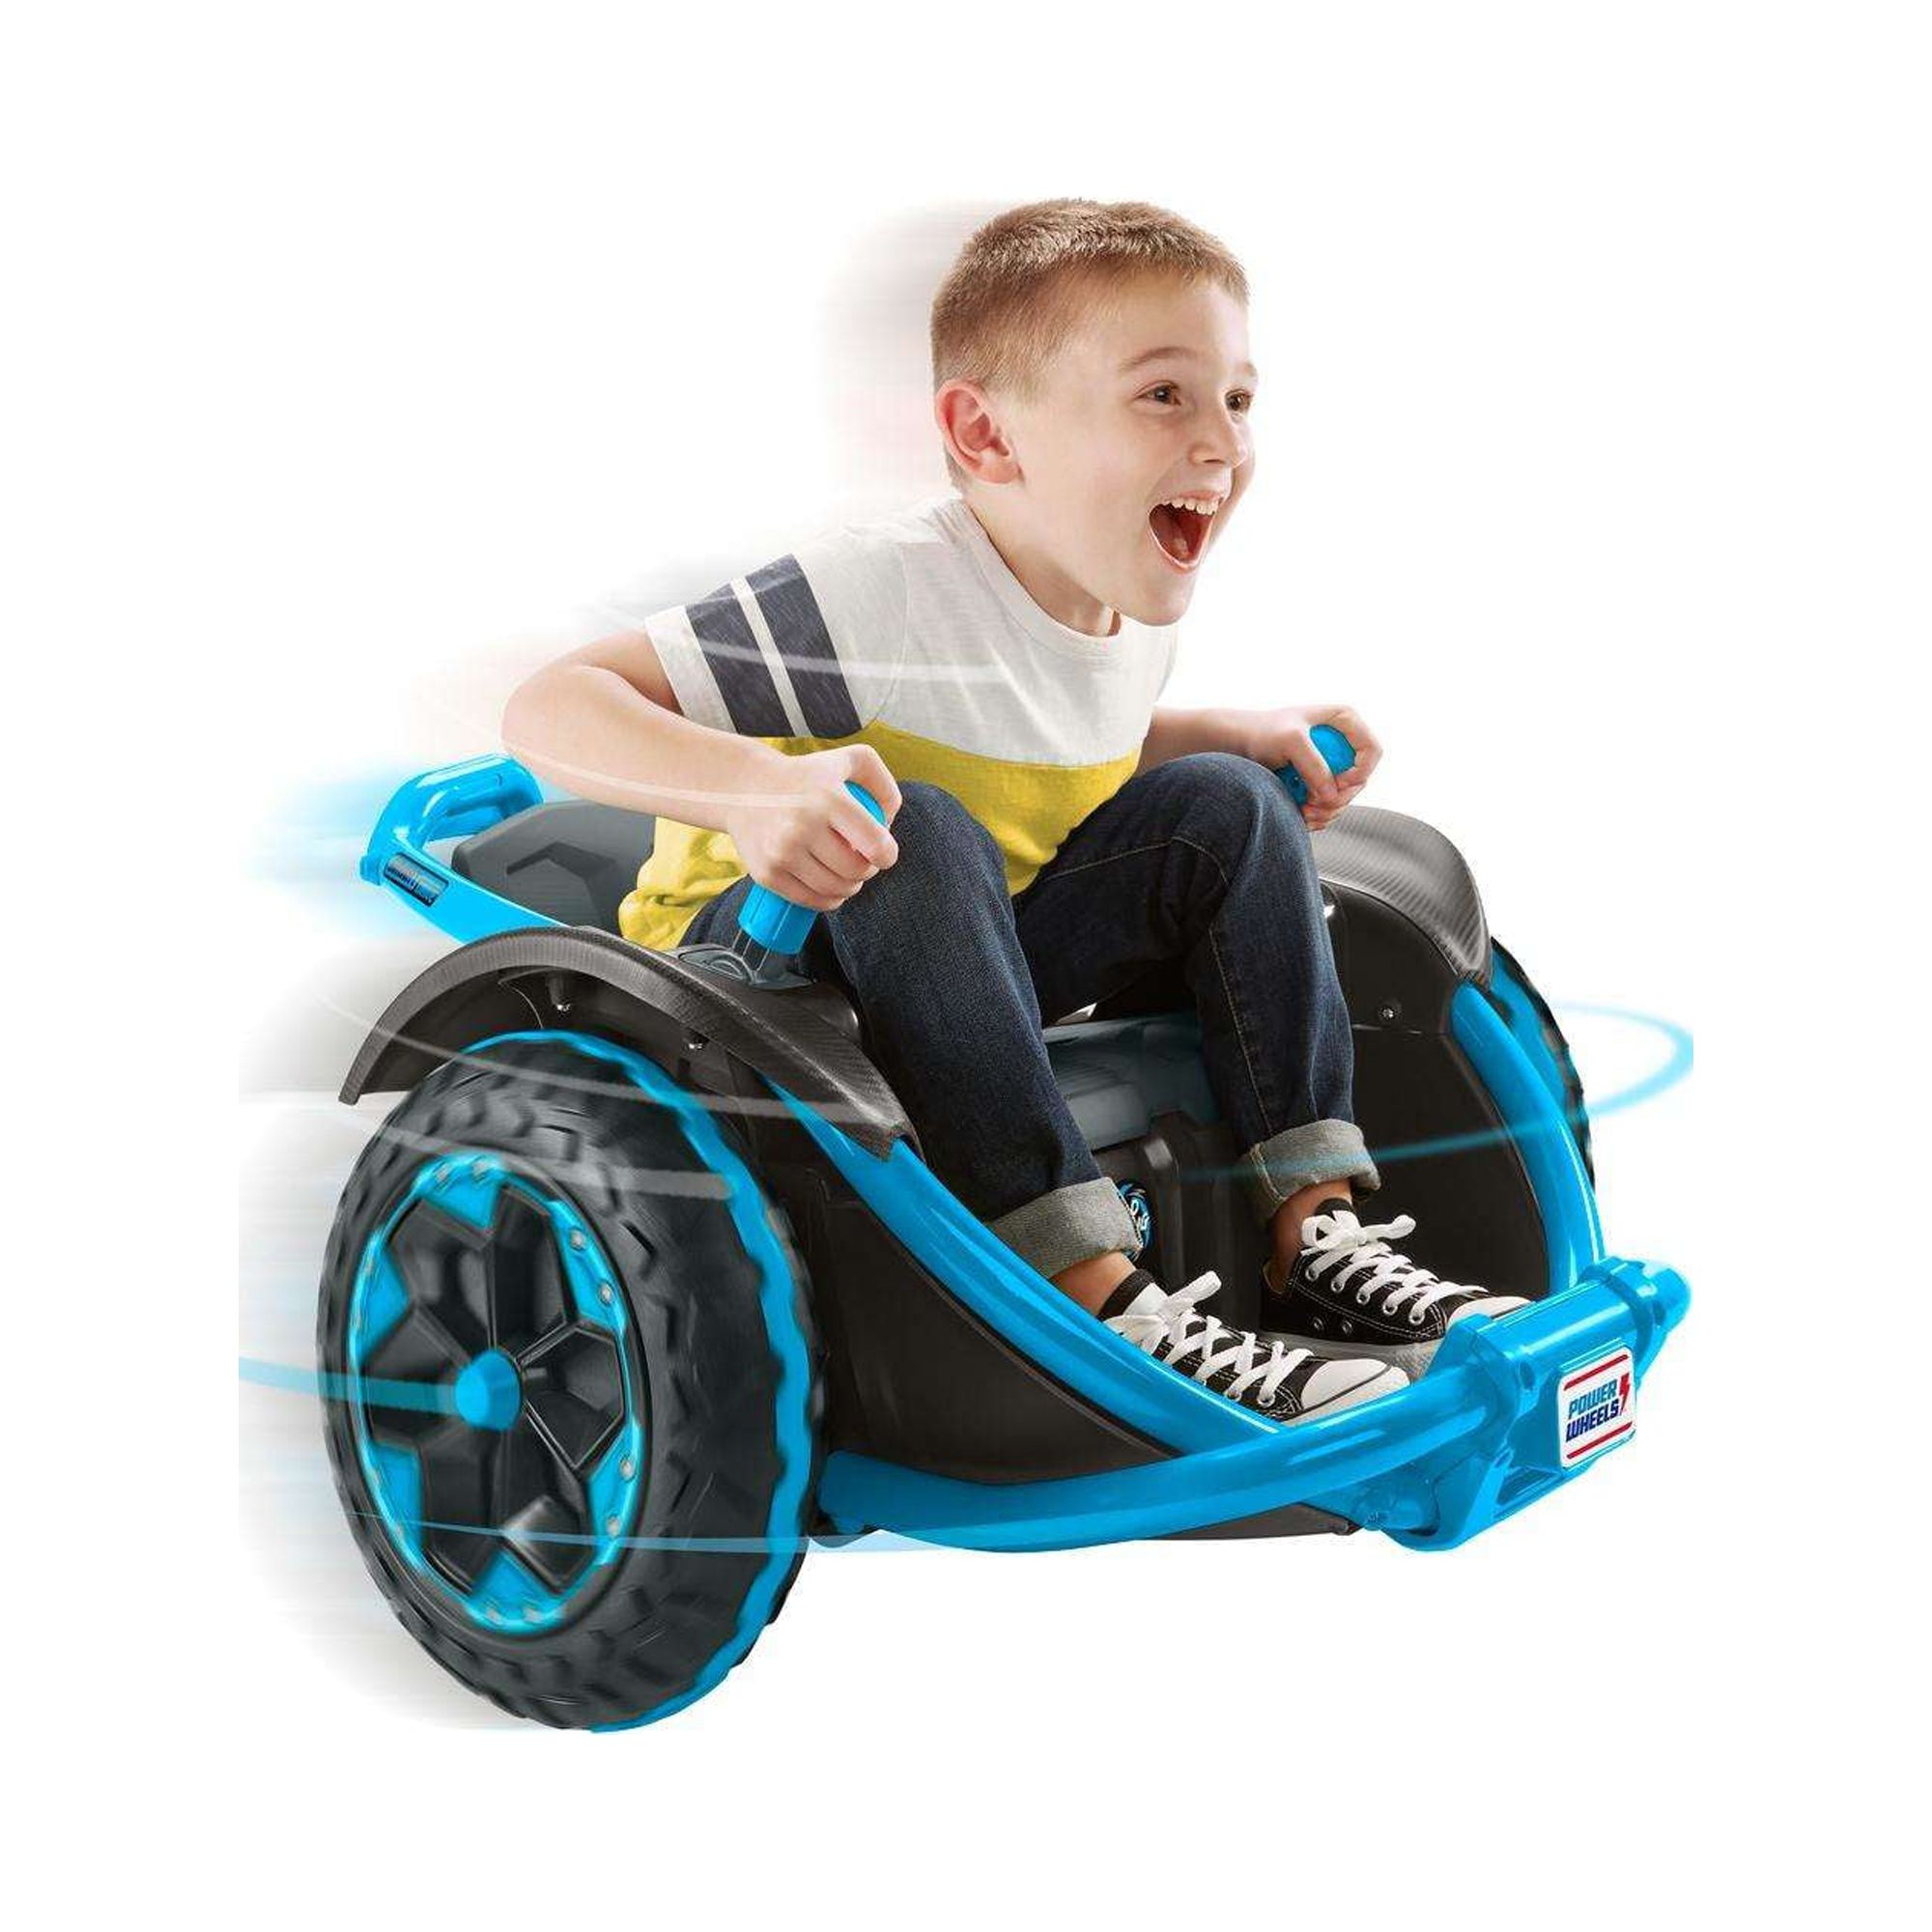 Power Wheels Wild Thing 360 Spinning Ride-On Vehicle, Blue, 12V - image 1 of 10